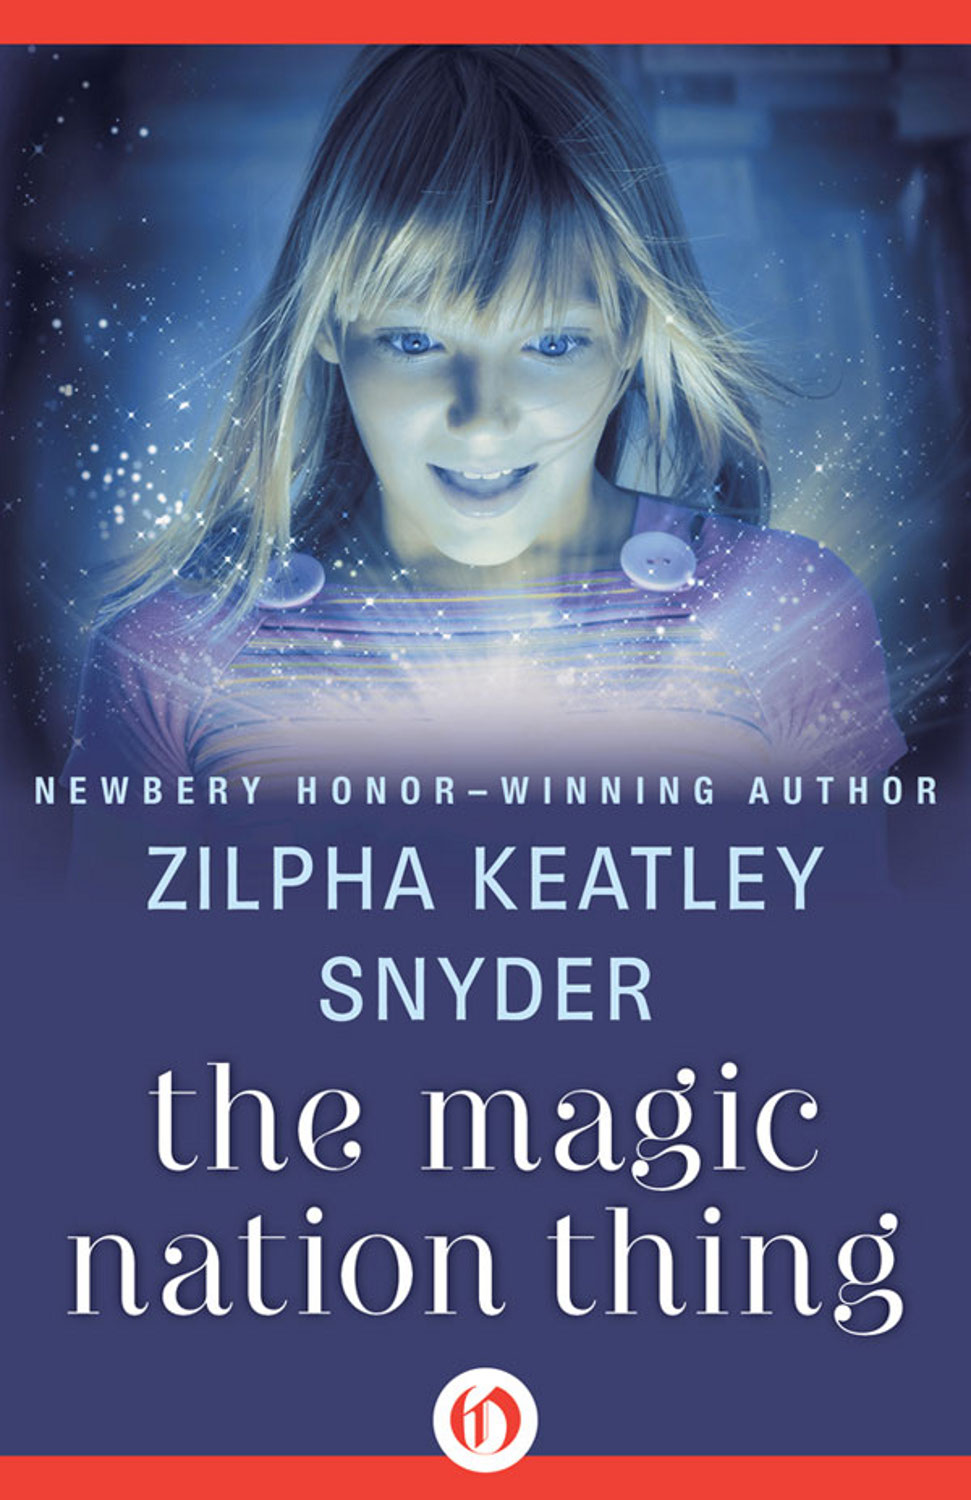 Magic Nation Thing by Zilpha Keatley Snyder